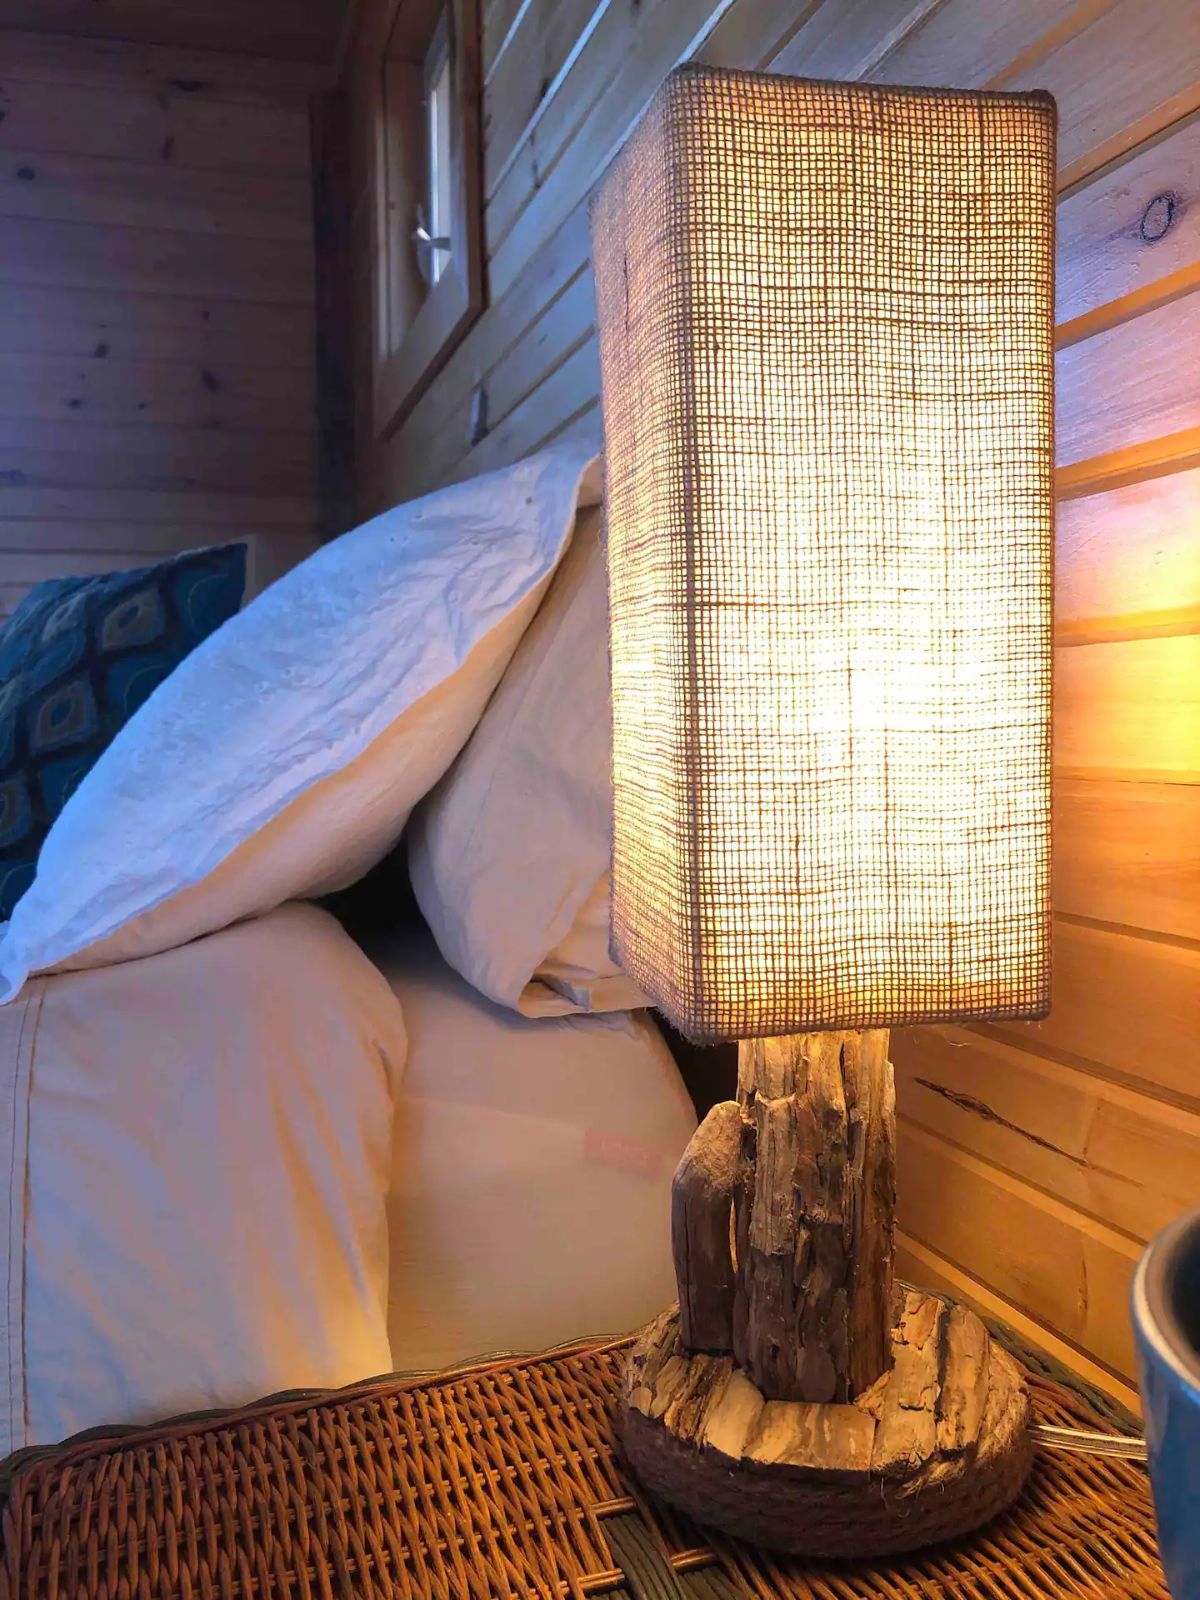 tall rectangle lamp against wall by bed